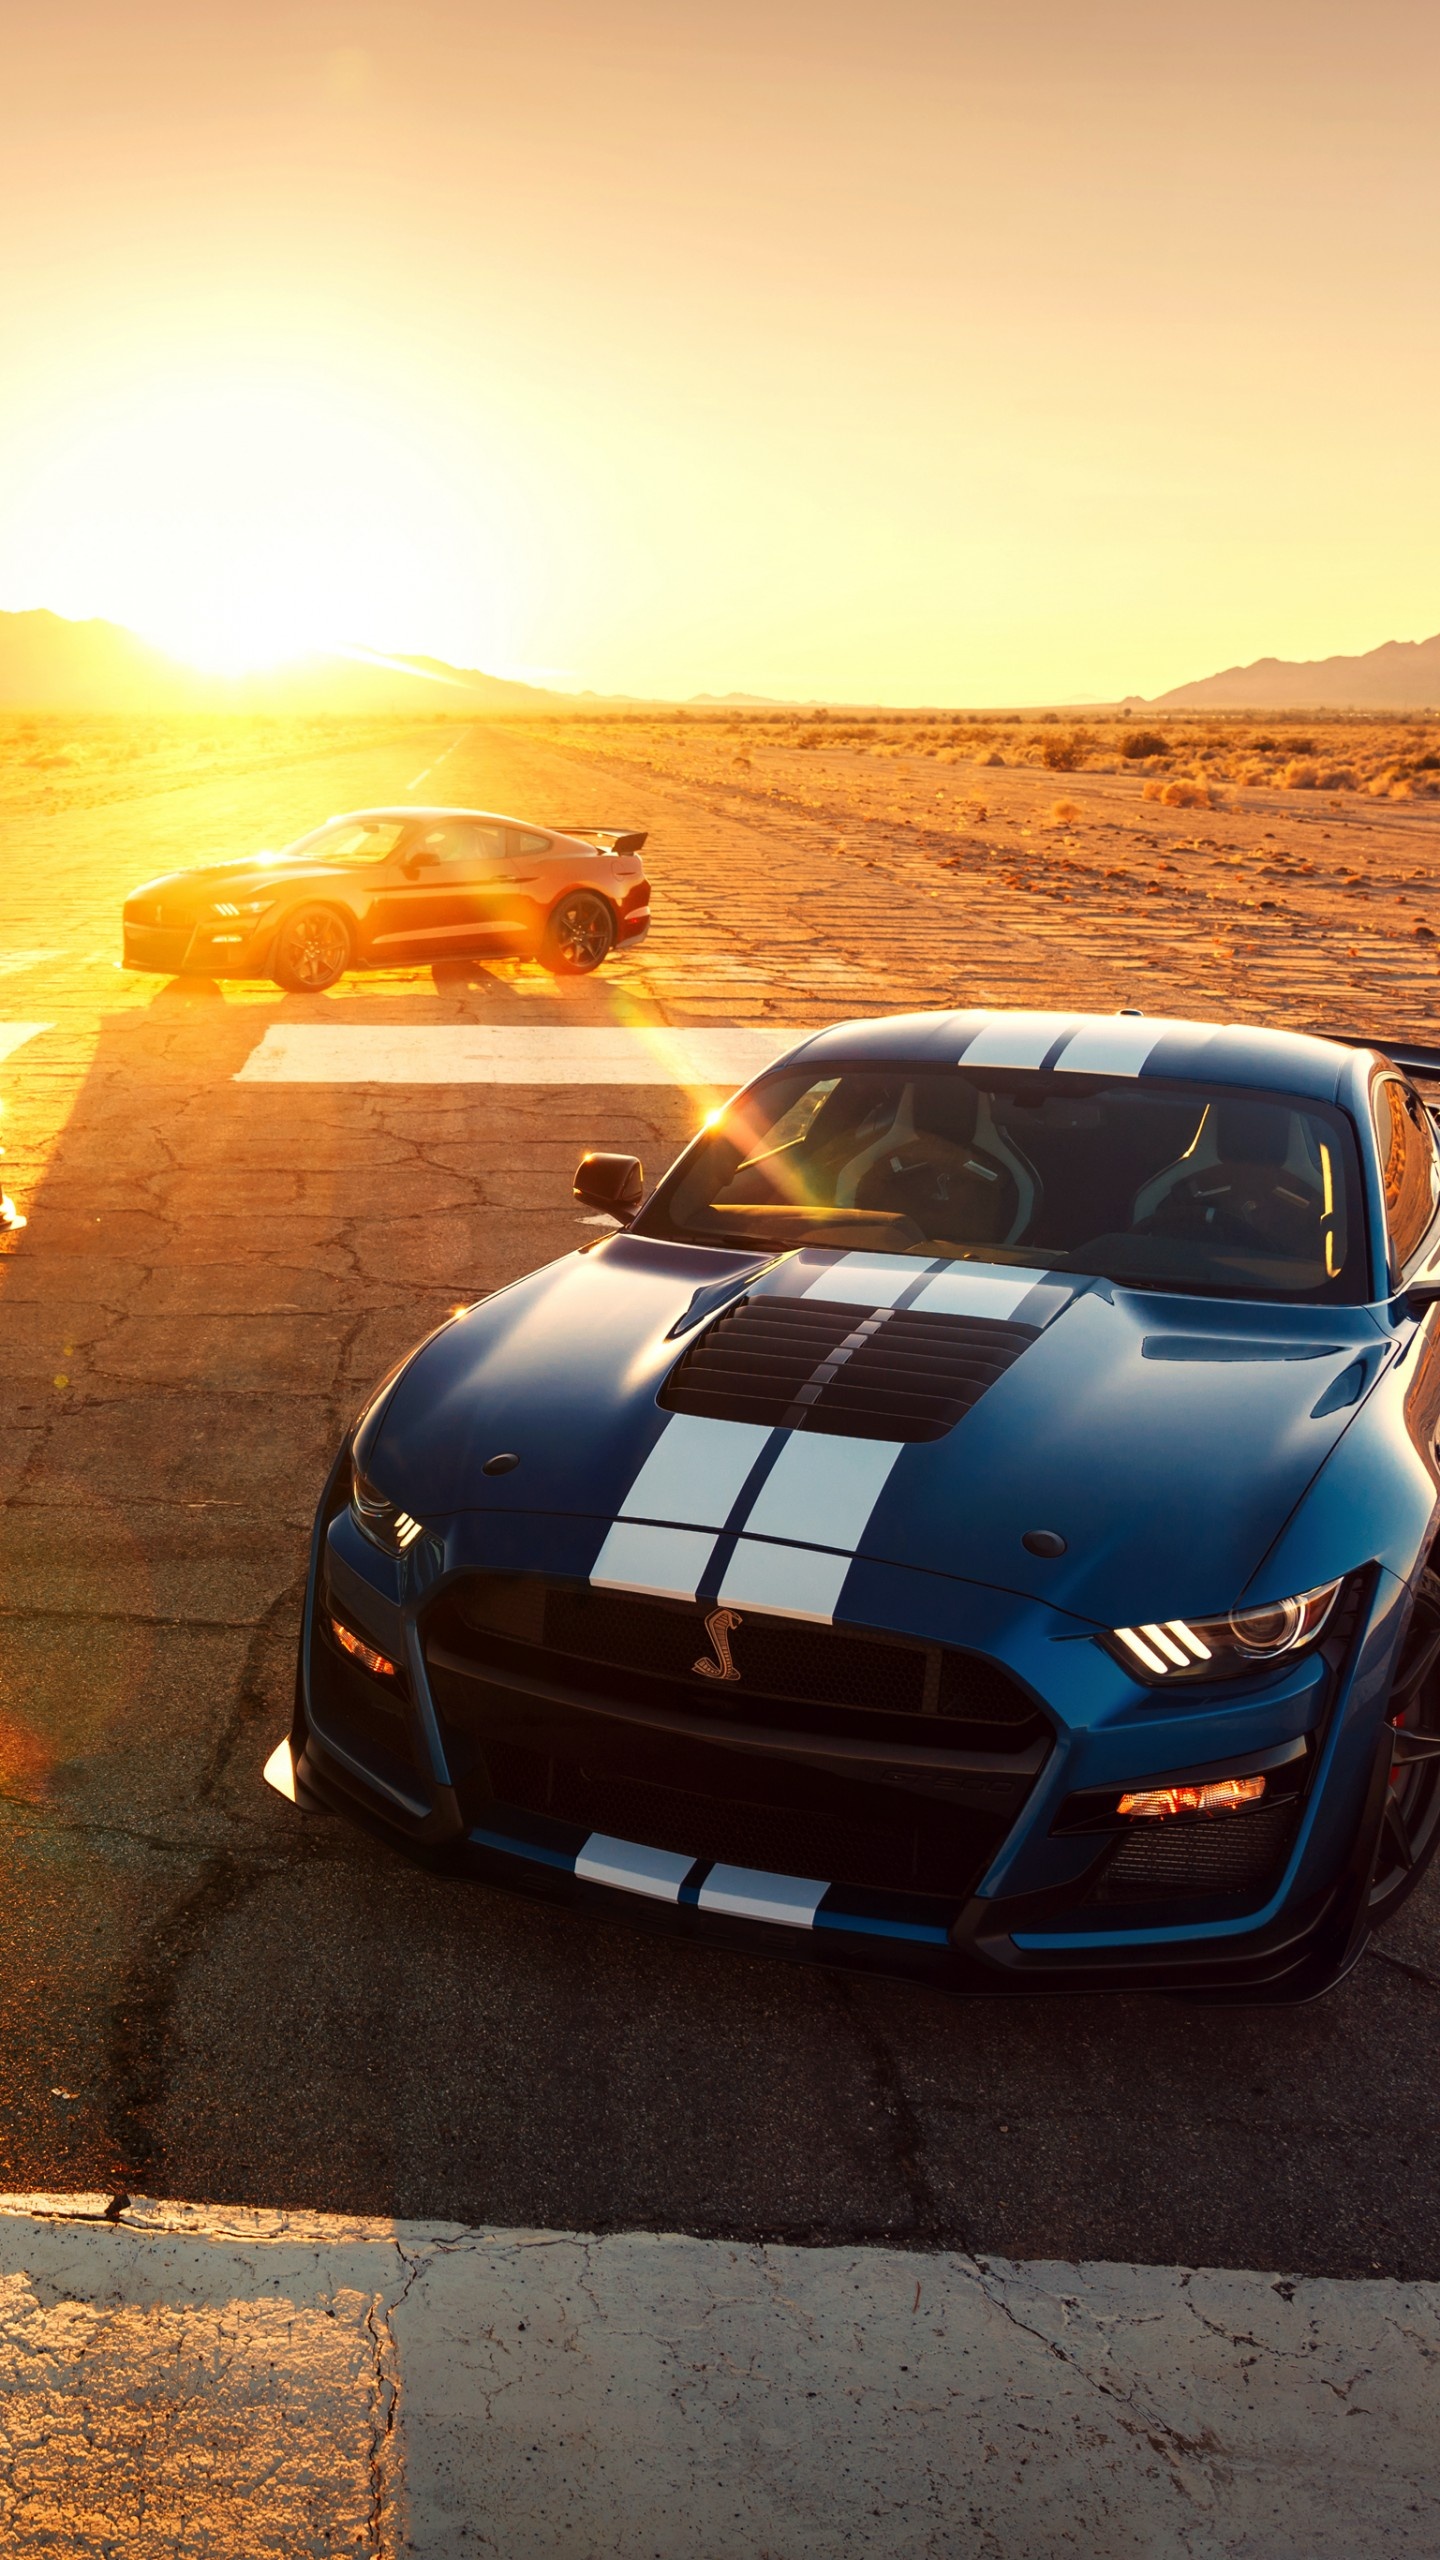 Wallpaper Ford Mustang Shelby GT500, 2020 Cars, 2019 Detroit Auto Show, 4K, Cars \u0026 Bikes #21061 1440x2560